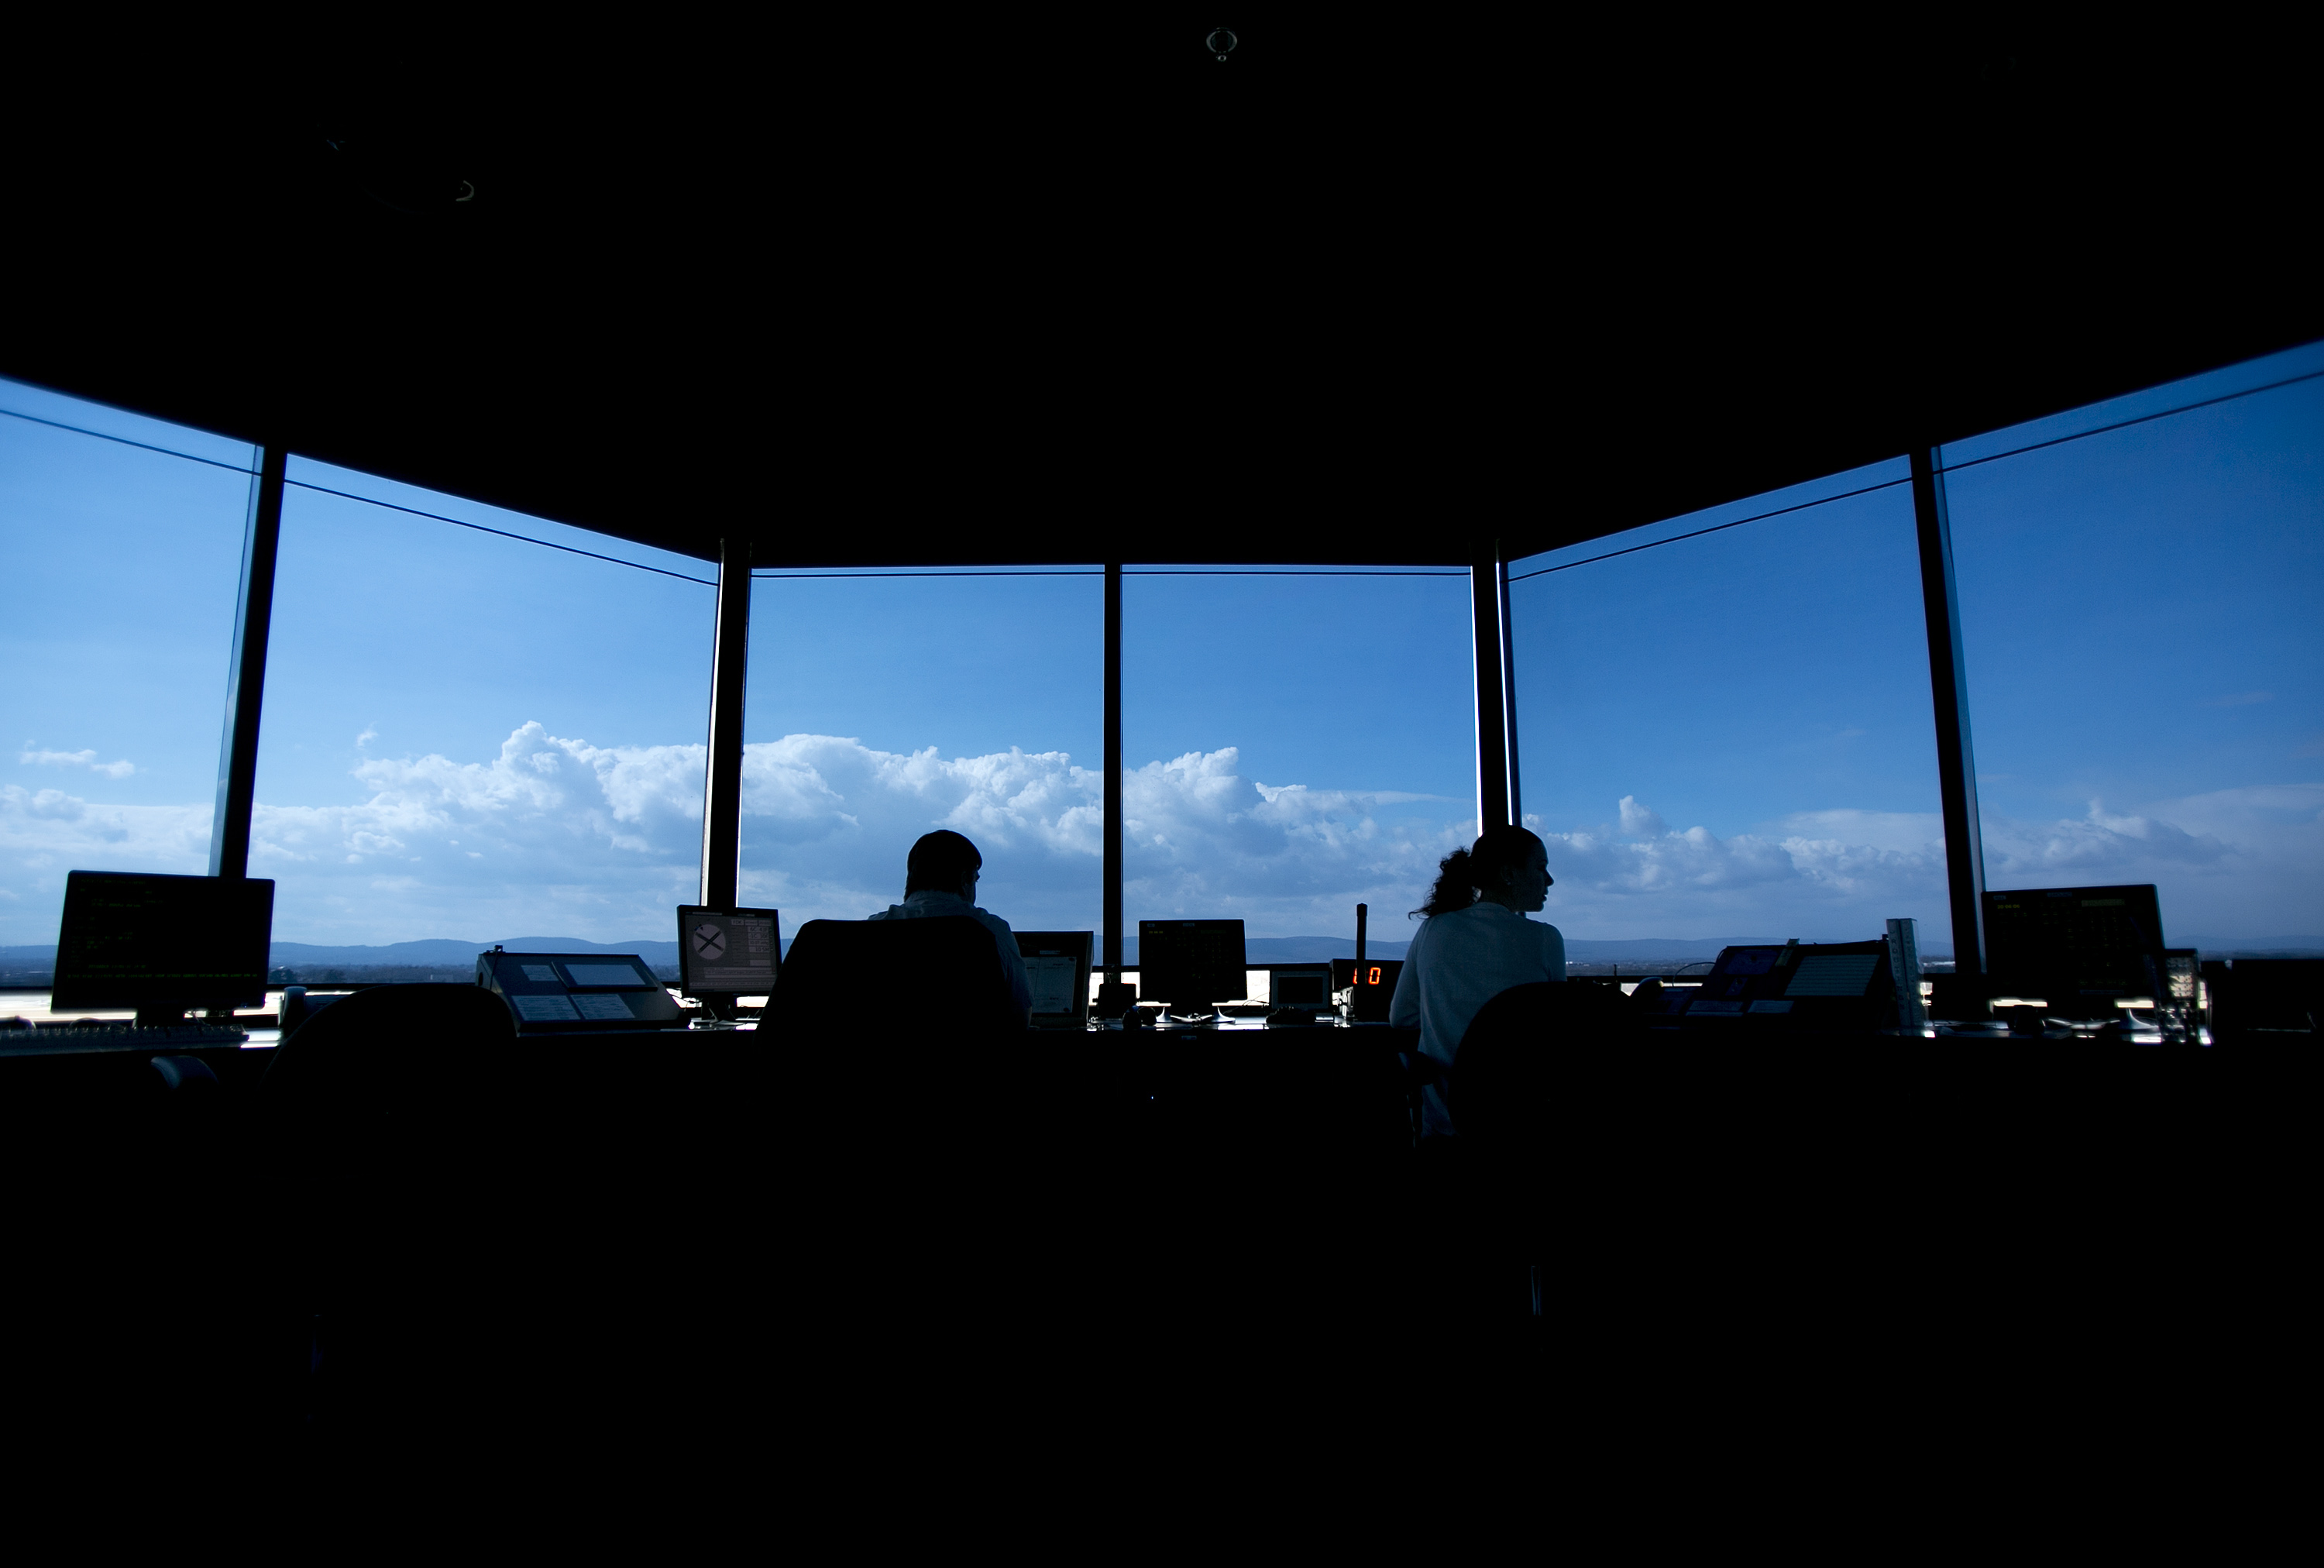 FAA To Close 149 U.S. Airport Towers In Automatic Budget Cuts